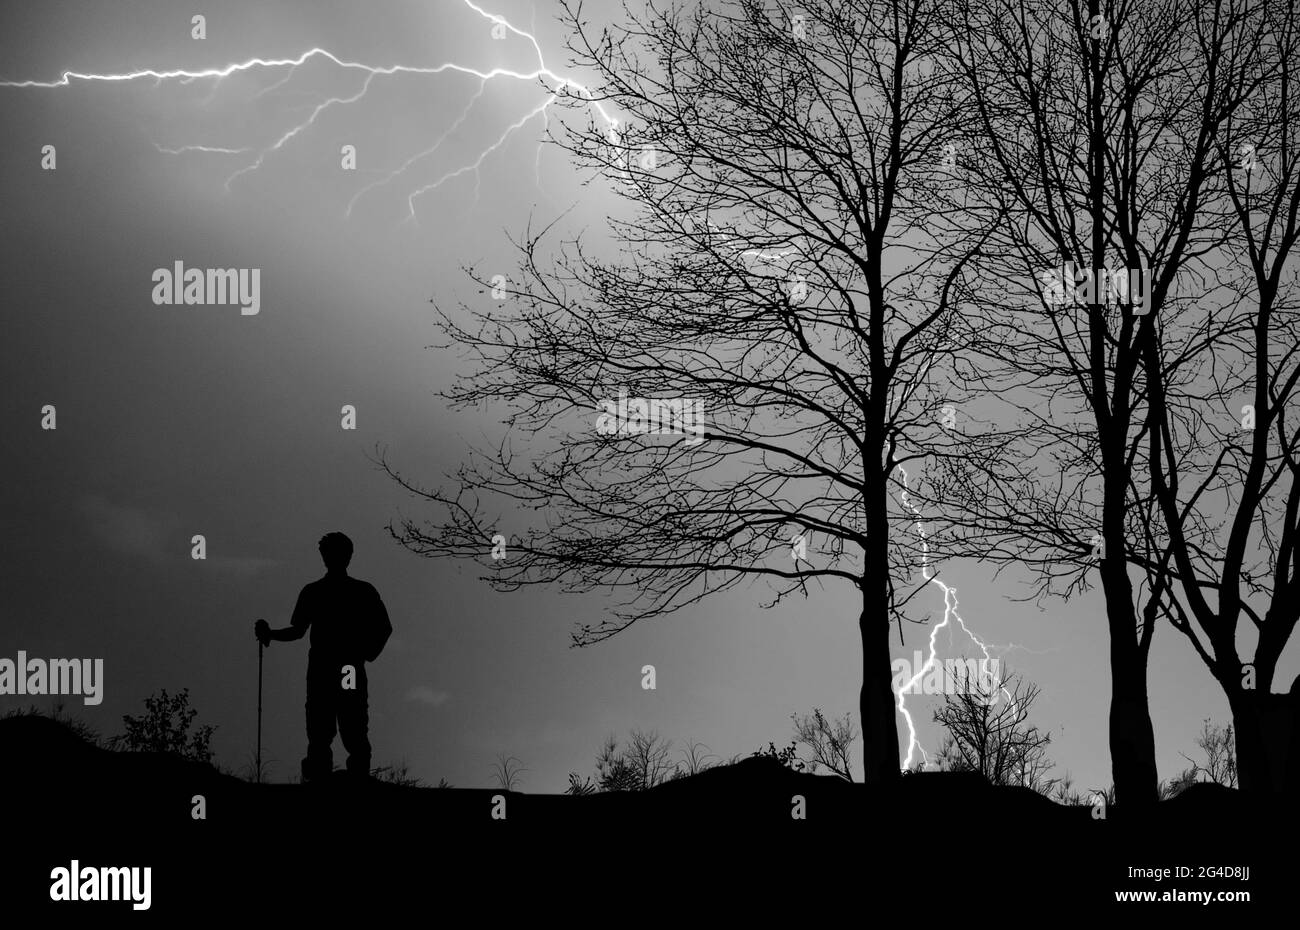 Dramatic view of the silhouette of a hiker in a thunderstorm with lightning flashing Stock Photo